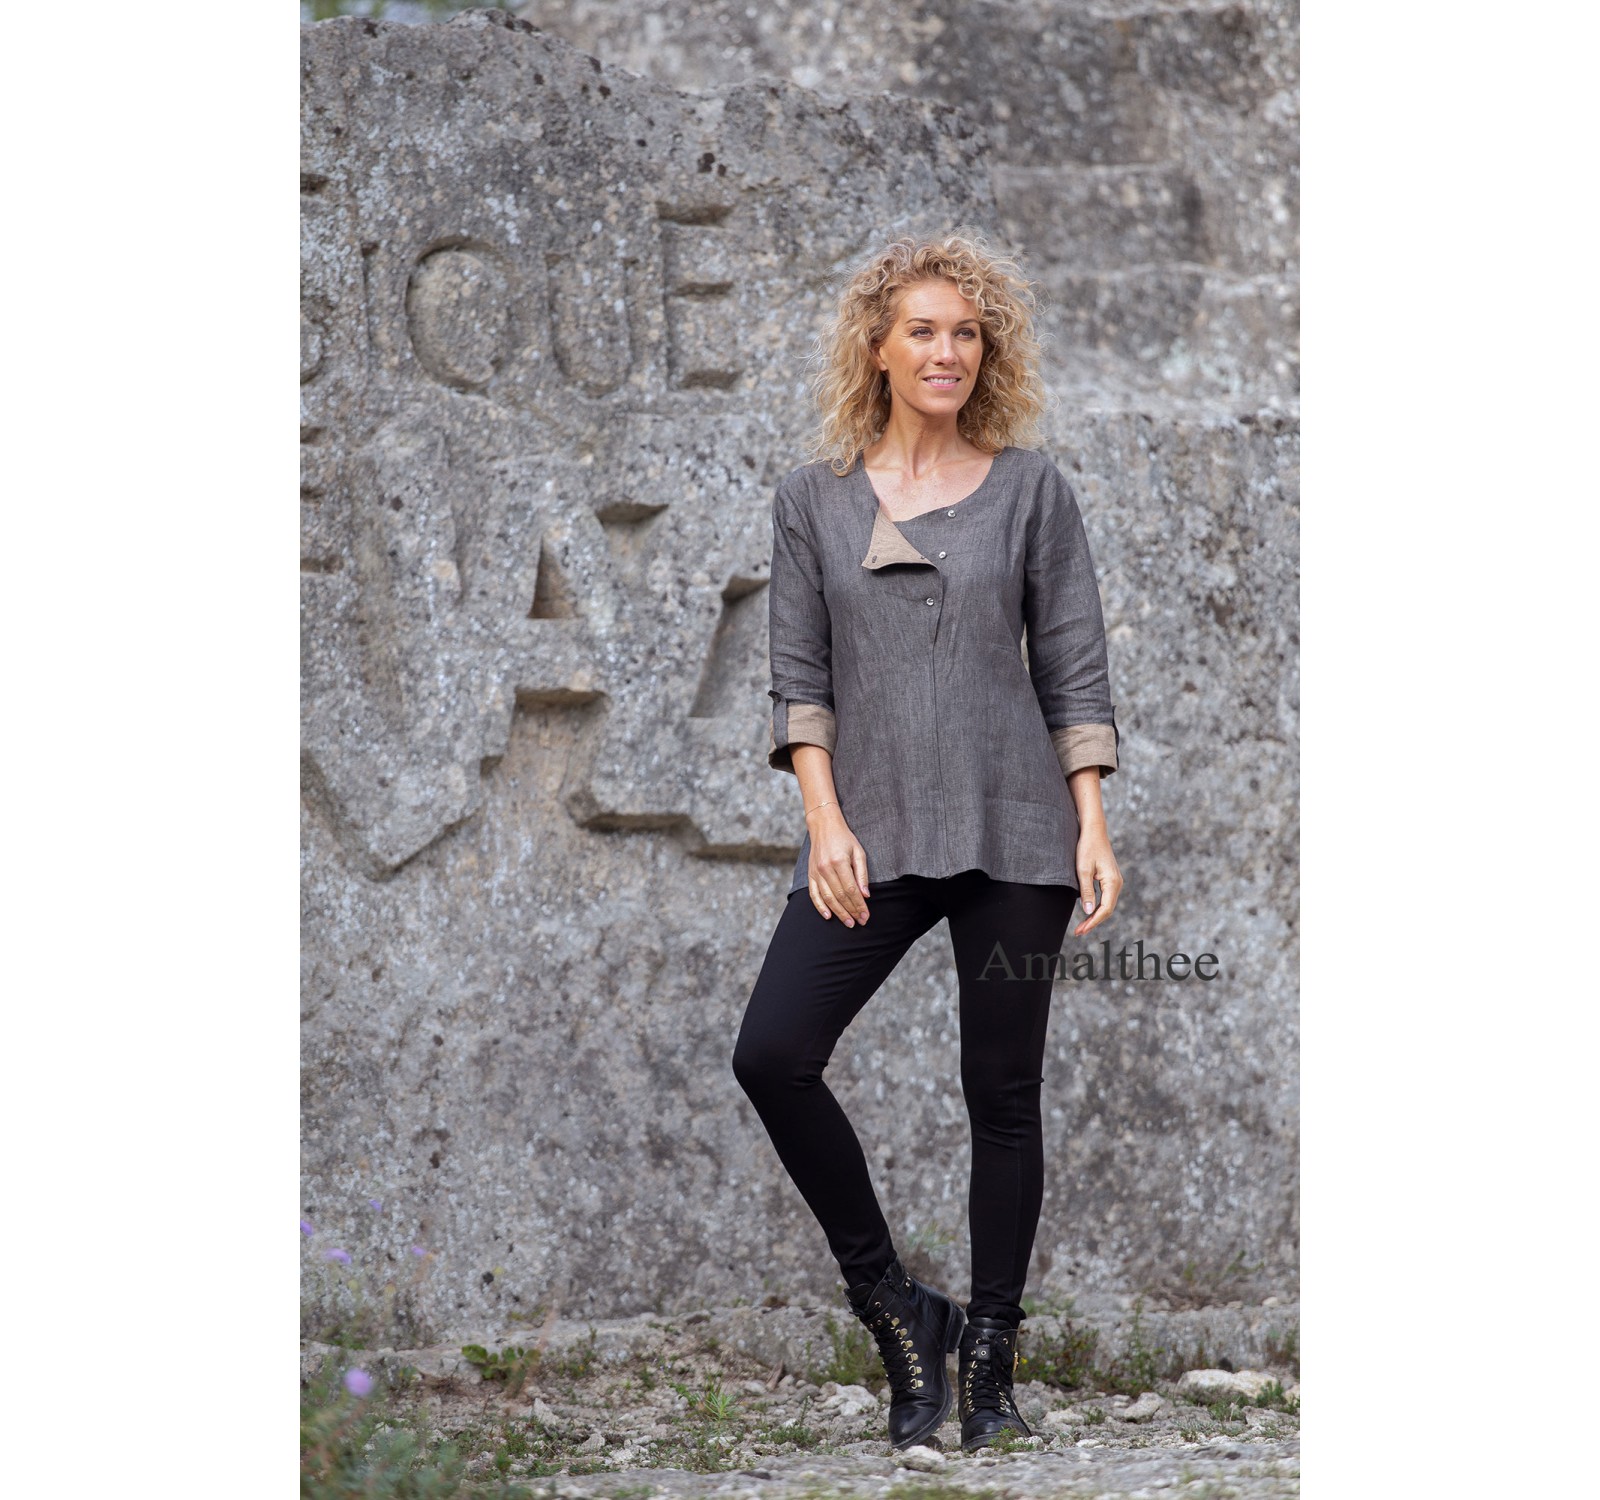 Two-tone Mathilde tunic in stone gray / taupe chambray linen with black jeggings